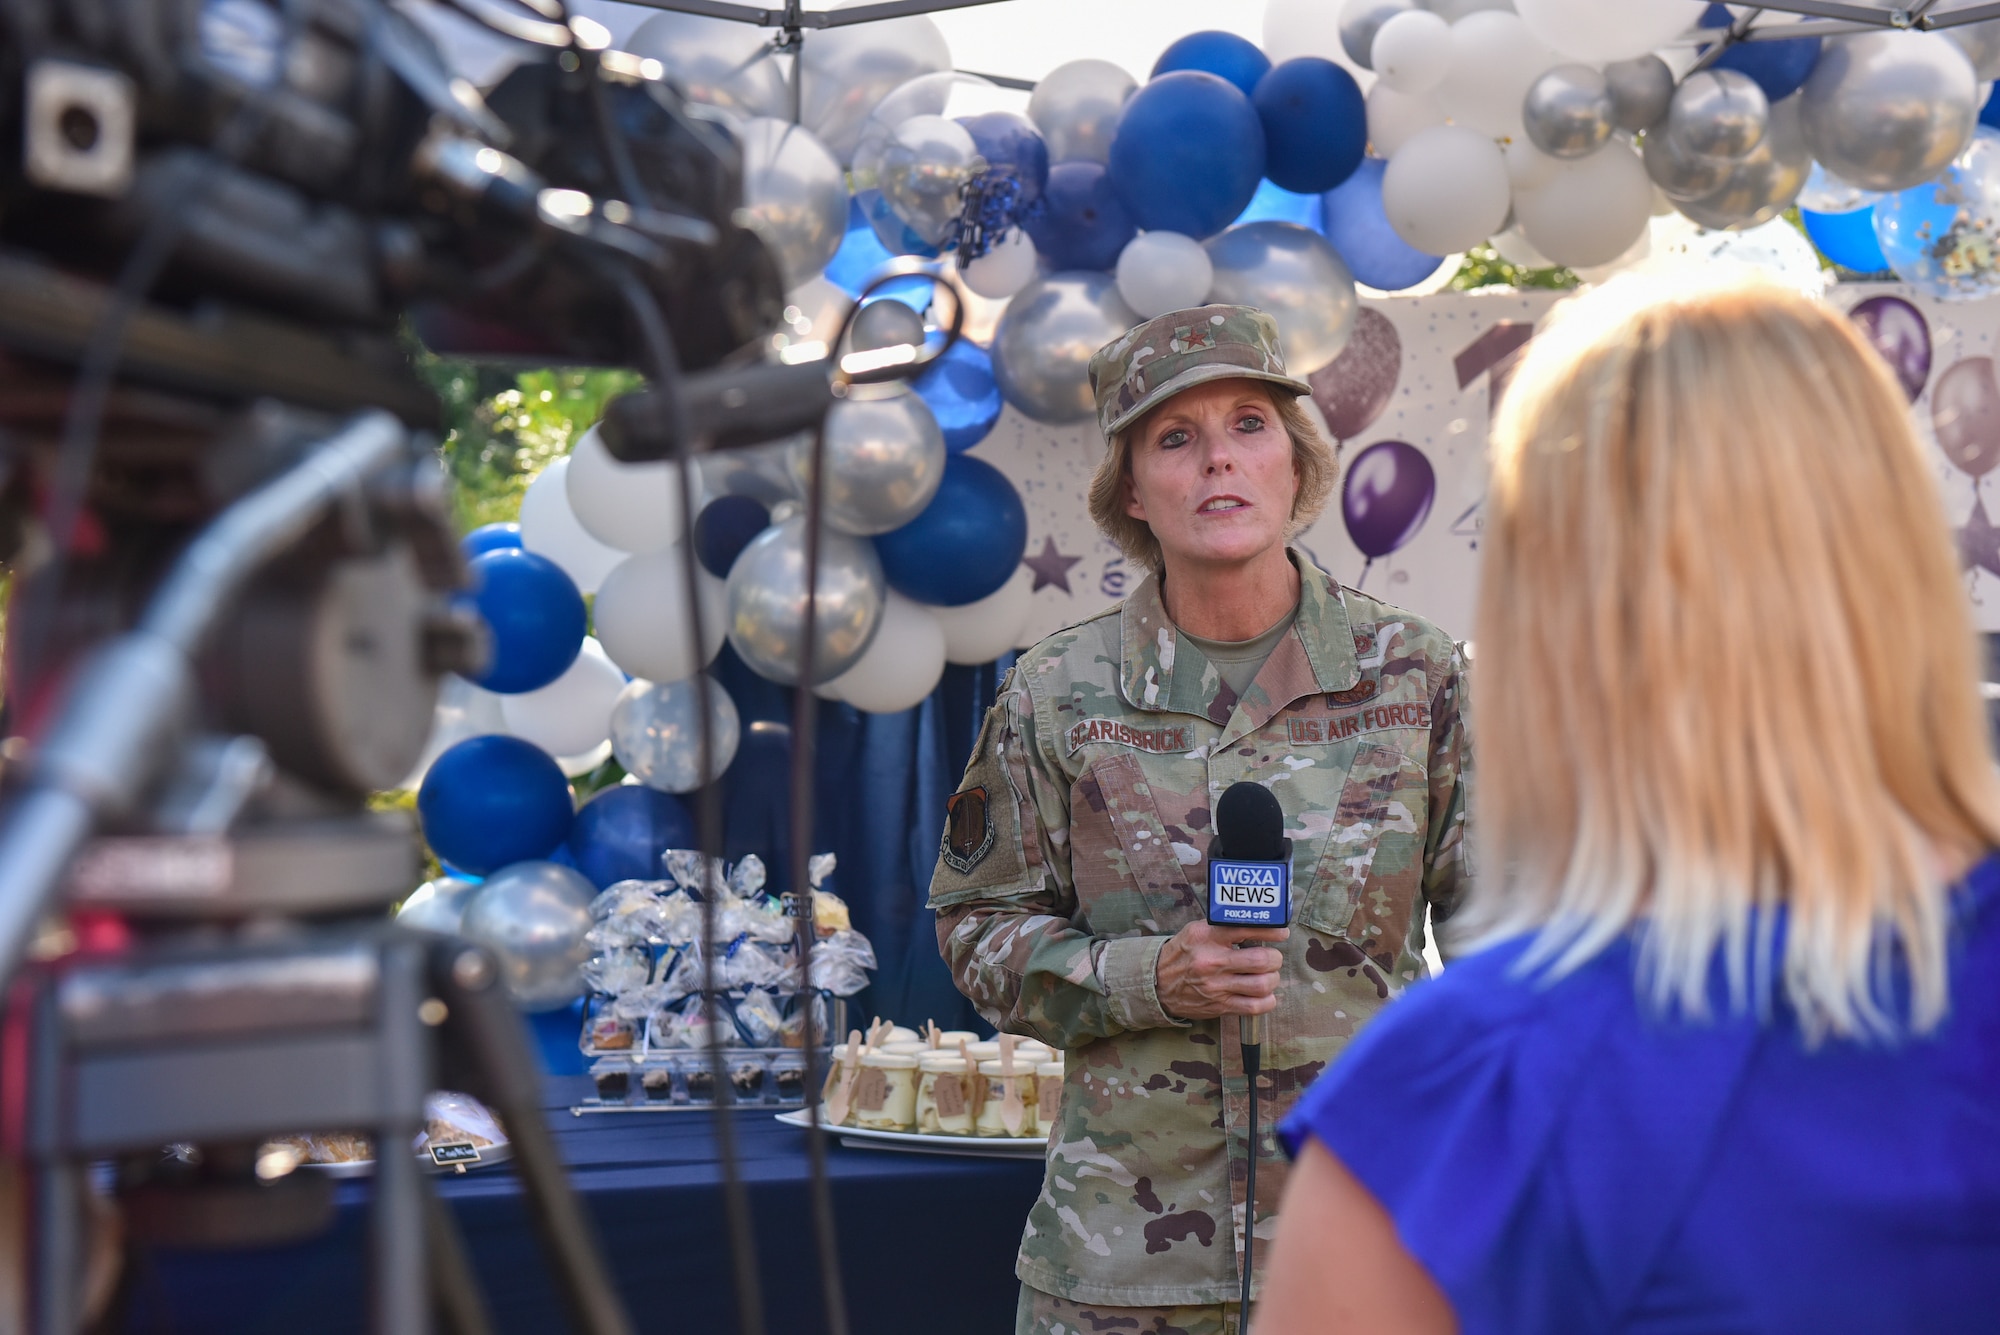 Brig. Gen. Stacey L. Scarisbrick, commander of Air Force Reserve Command's Force Generation Center, gives a media interview immediately following a ceremony celebrating the 10th anniversary of the FGC at Robins Air Force Base, Georgia, Oct. 1, 2021. The FGC is the single organization responsible for generating Air Force Reserve forces by leveraging Reserve strategic capability to meet operational needs in support of the global force. The Reserve Citizen Airmen who support the FGC perform all aspects of force generation to include oversight, visibility and accountability of more than 70,000 Air Force Reserve forces. (U.S. Air Force photo by Misuzu Allen)